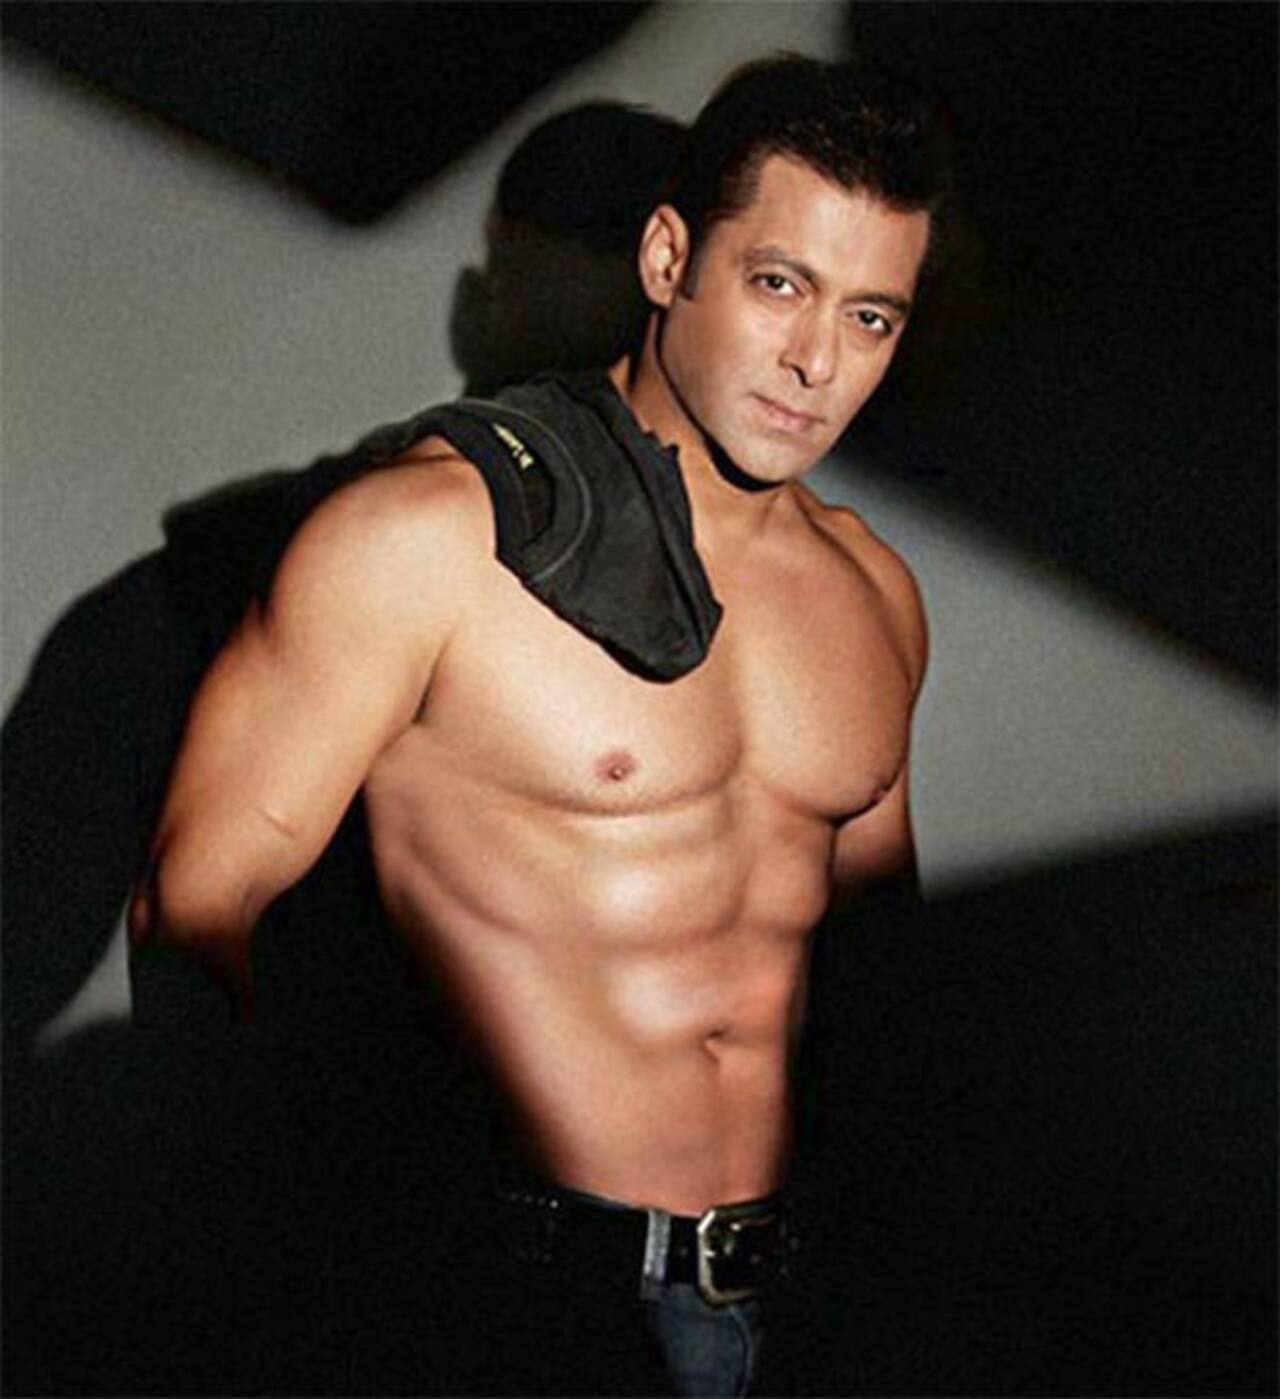 In this old interview, Salman Khan reveals the real reason for his shirtless scenes and also who suggested it